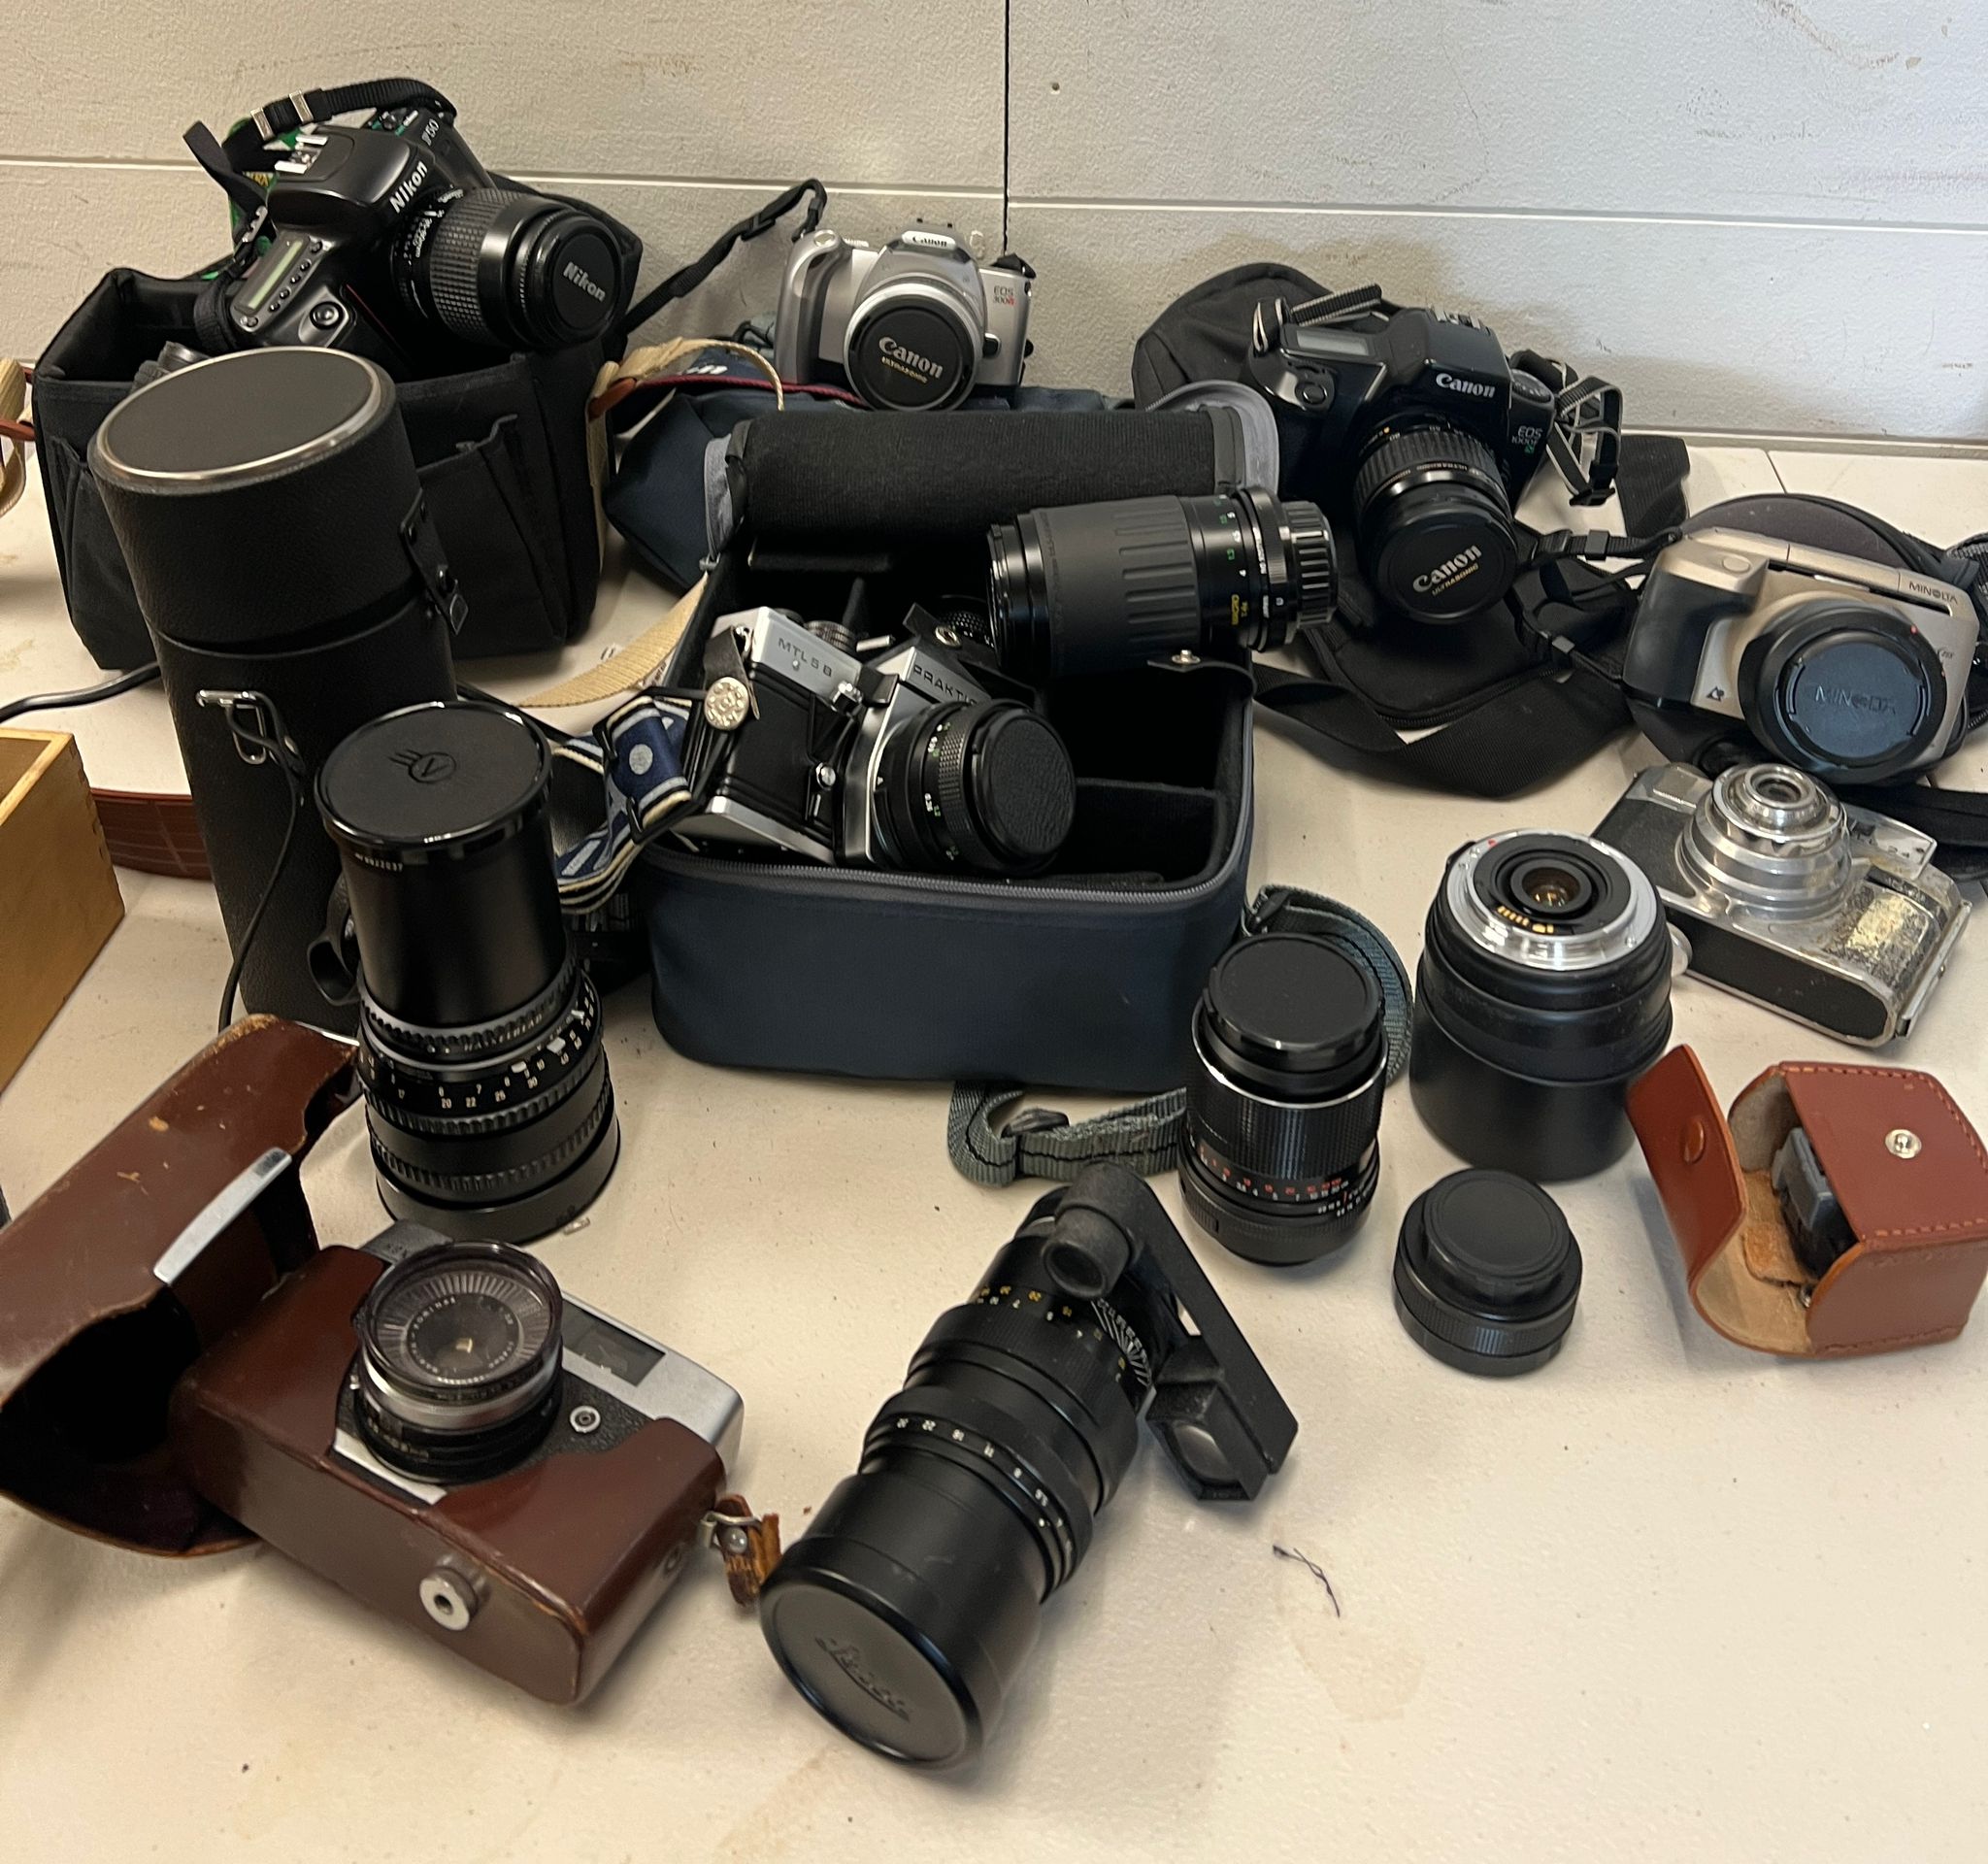 A collection of cameras and lens including Cannons, Nikon, Leica etc - Image 13 of 20